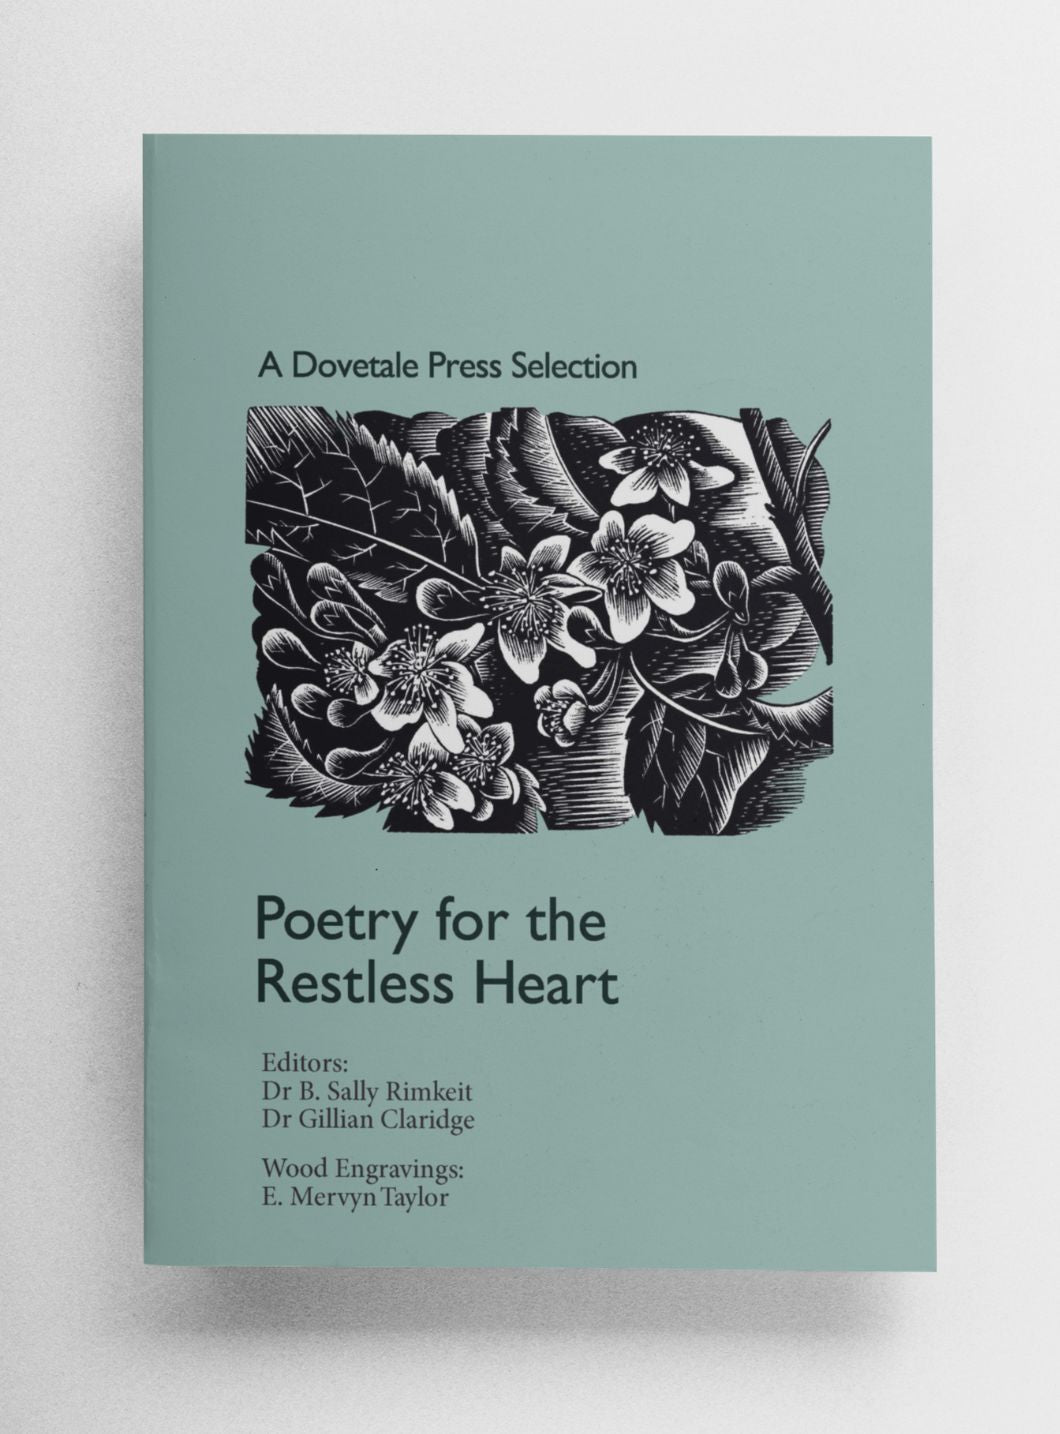 A book cover with the title "Poetry for the Restless Heart: A Dovetale Press Selection" in white text. The cover also features a black and white illustration of flowers and leaves.